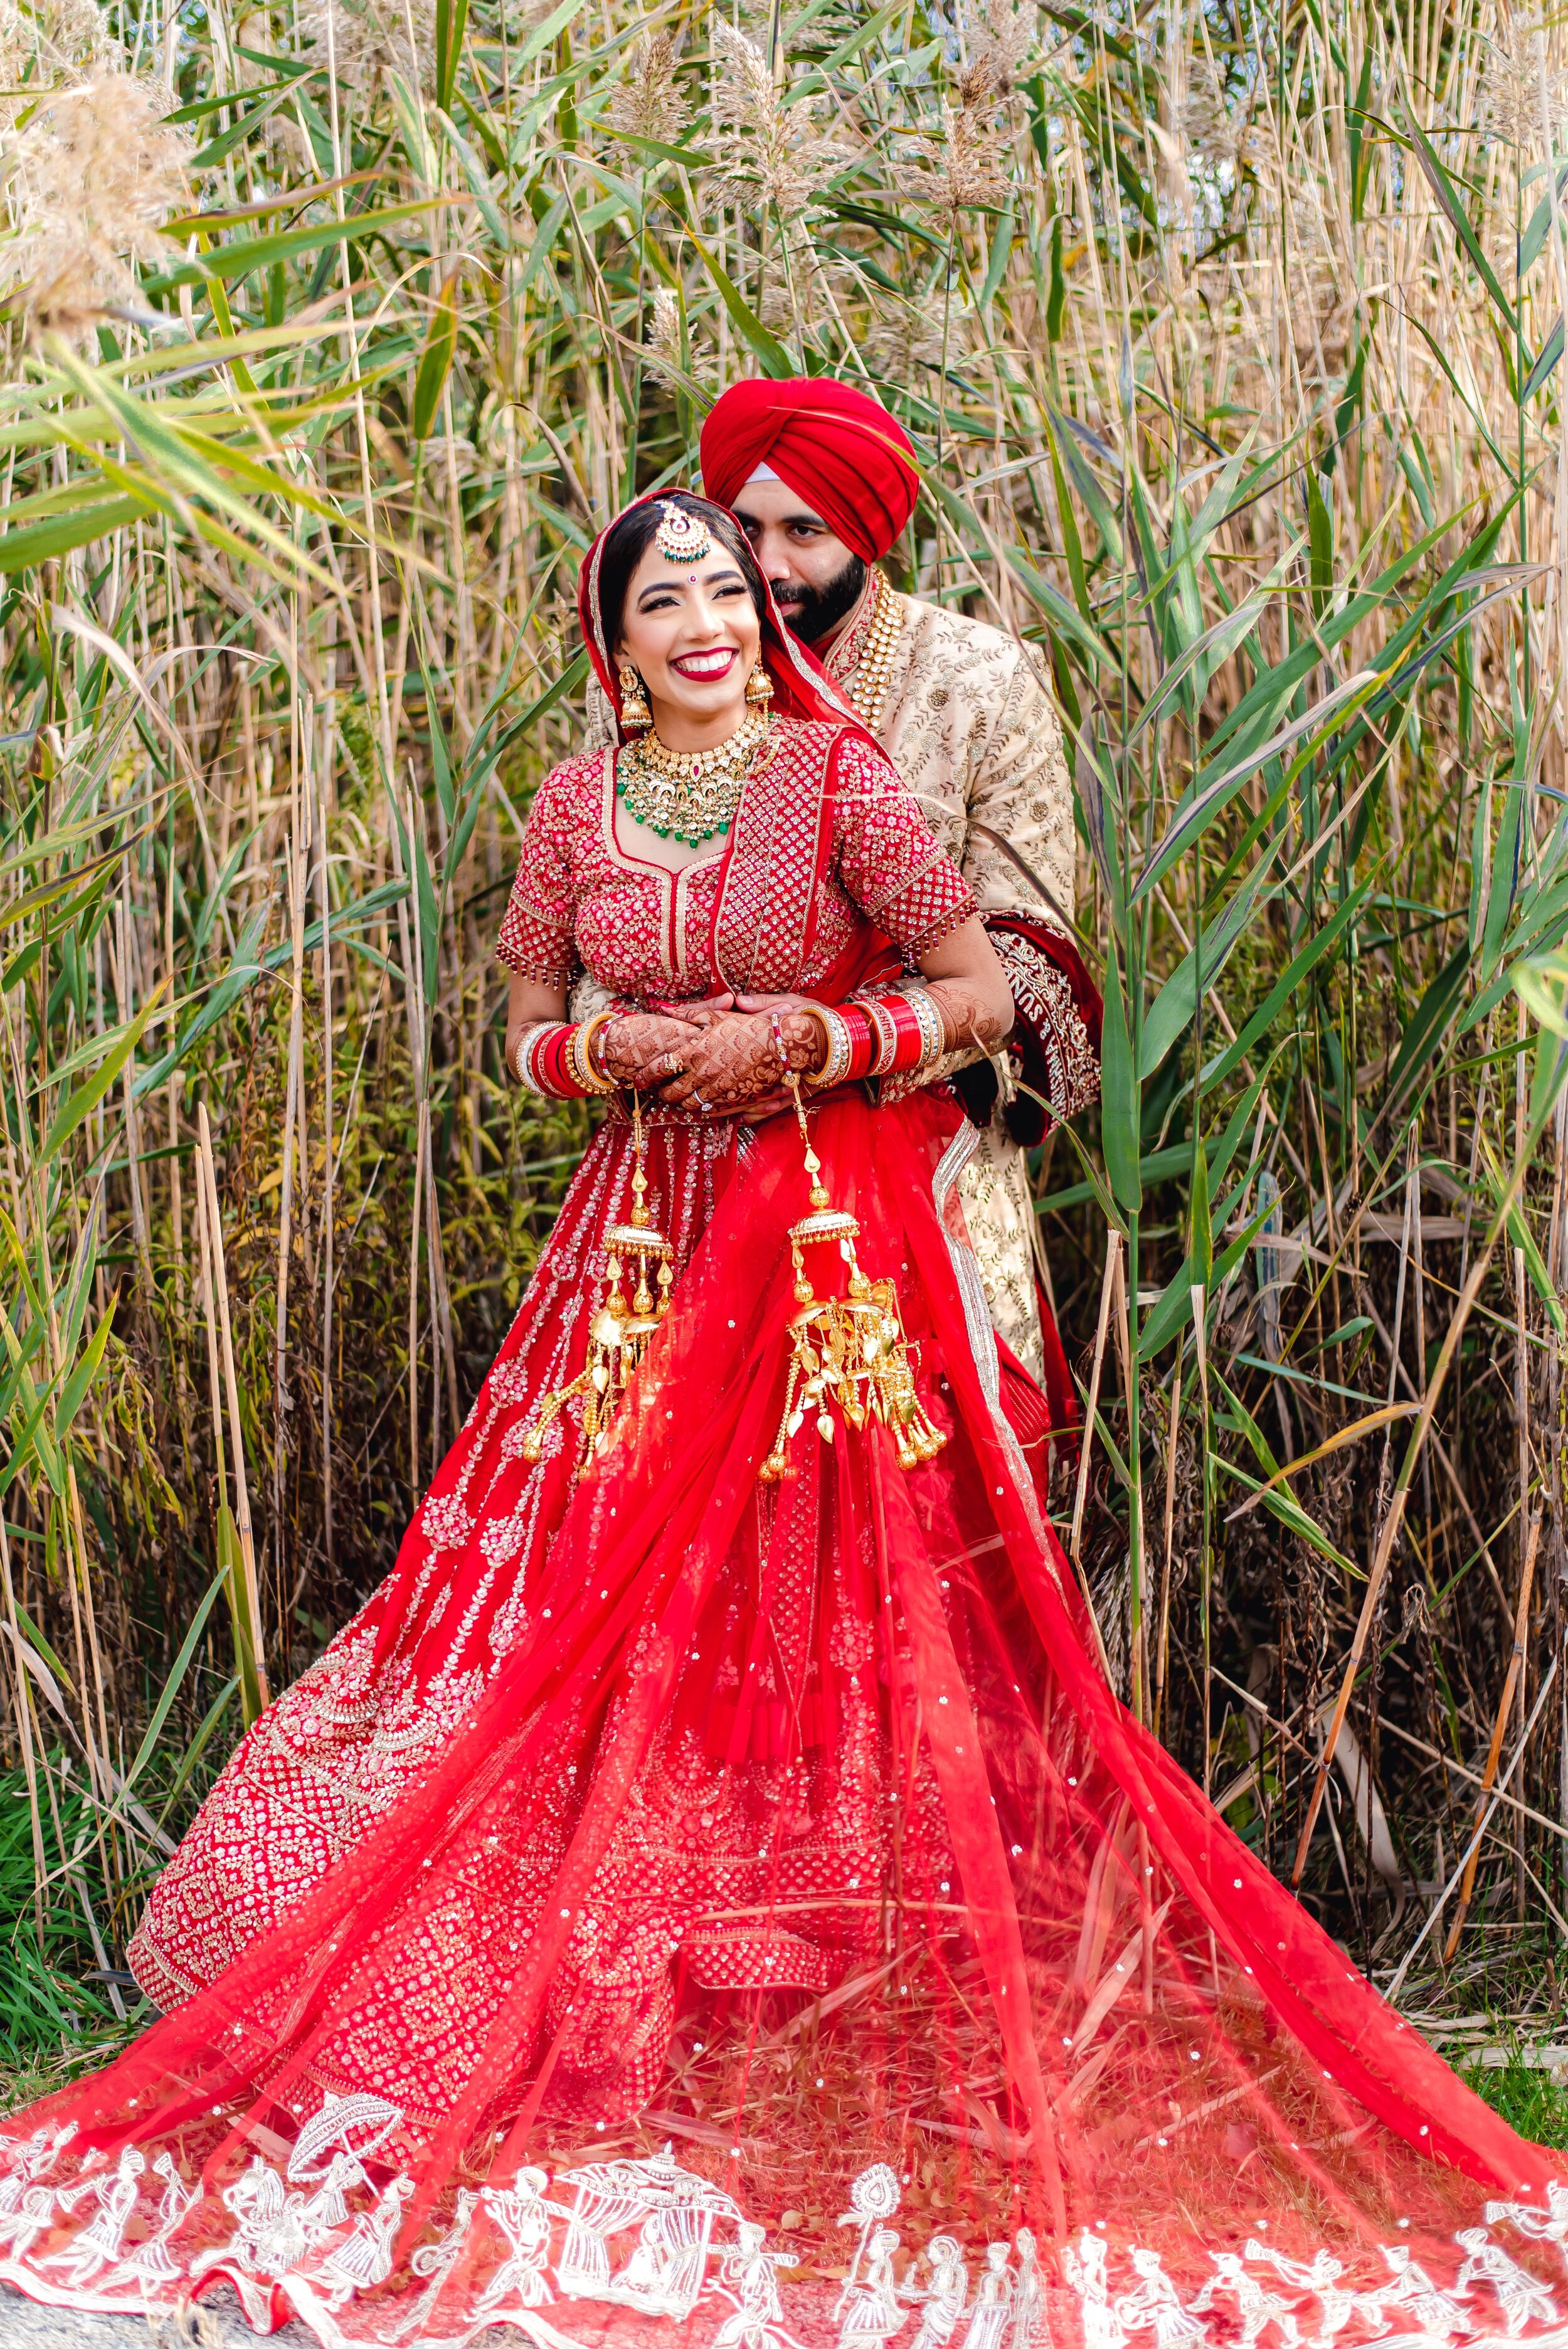 Punjabi and Gujarati Fusion Wedding filled with Traditions — CHI thee pic